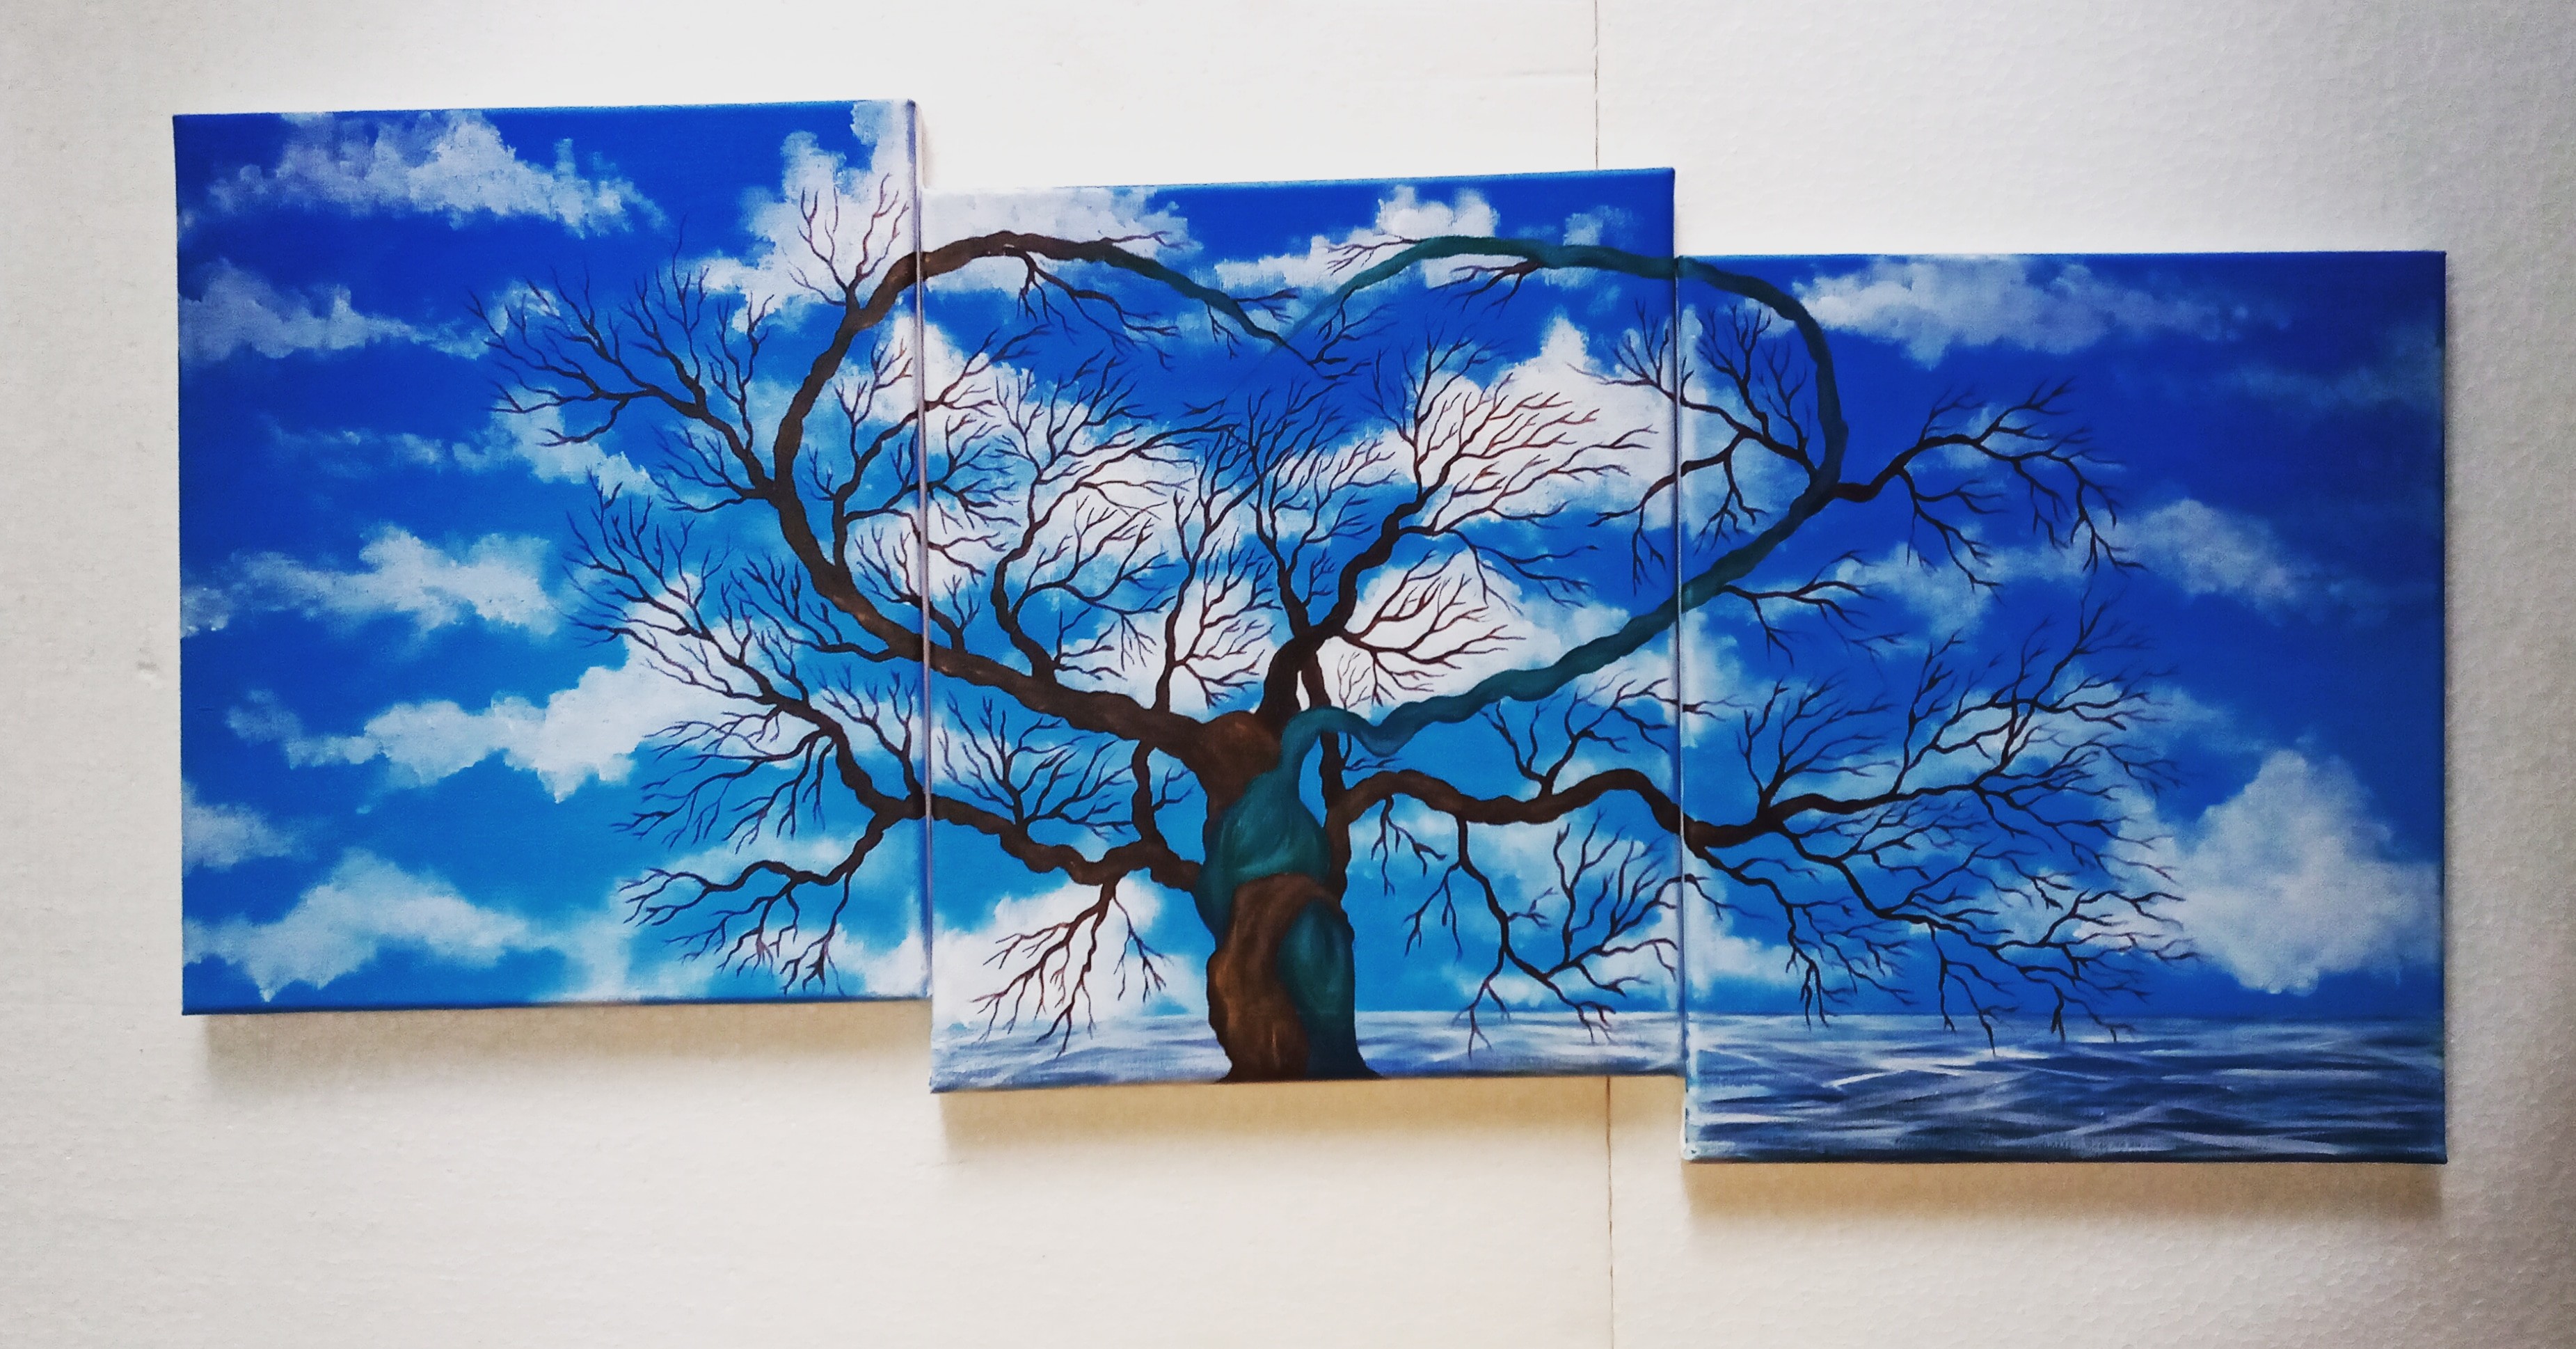 Nature scenery on 3canvas board by Hasna Musawvir